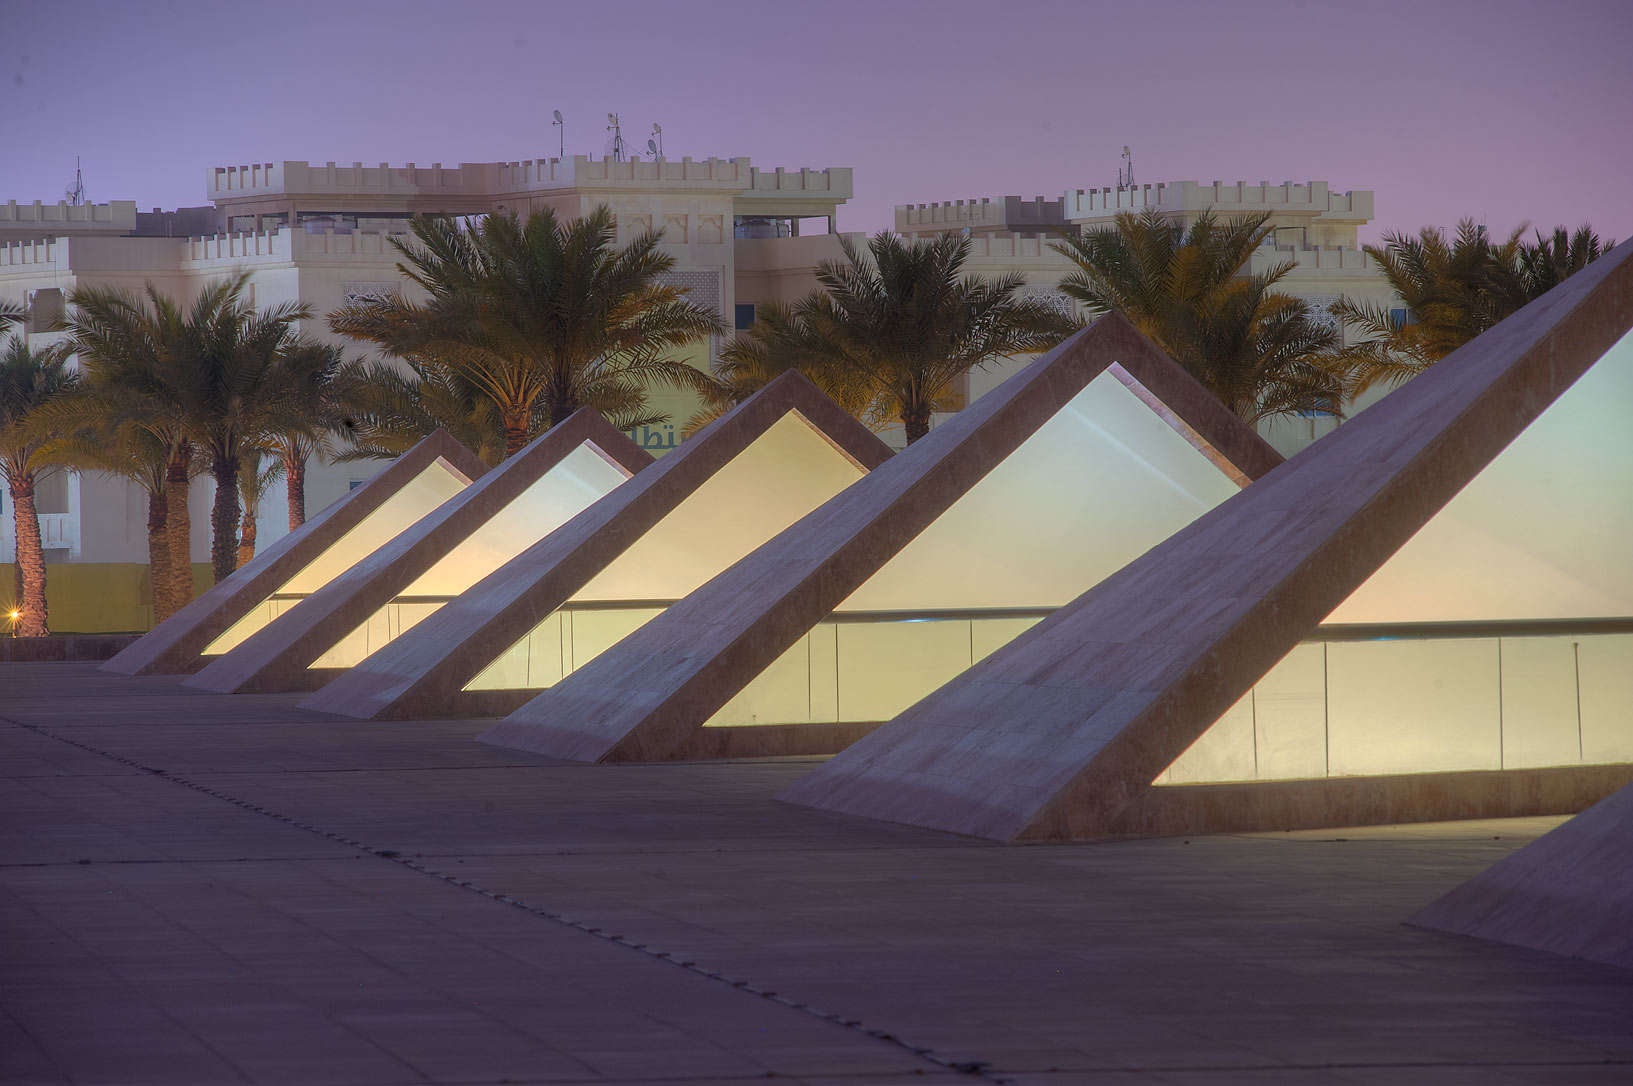 Triangular roof structures at Texas A&M University Campus in Doha, Qatar.